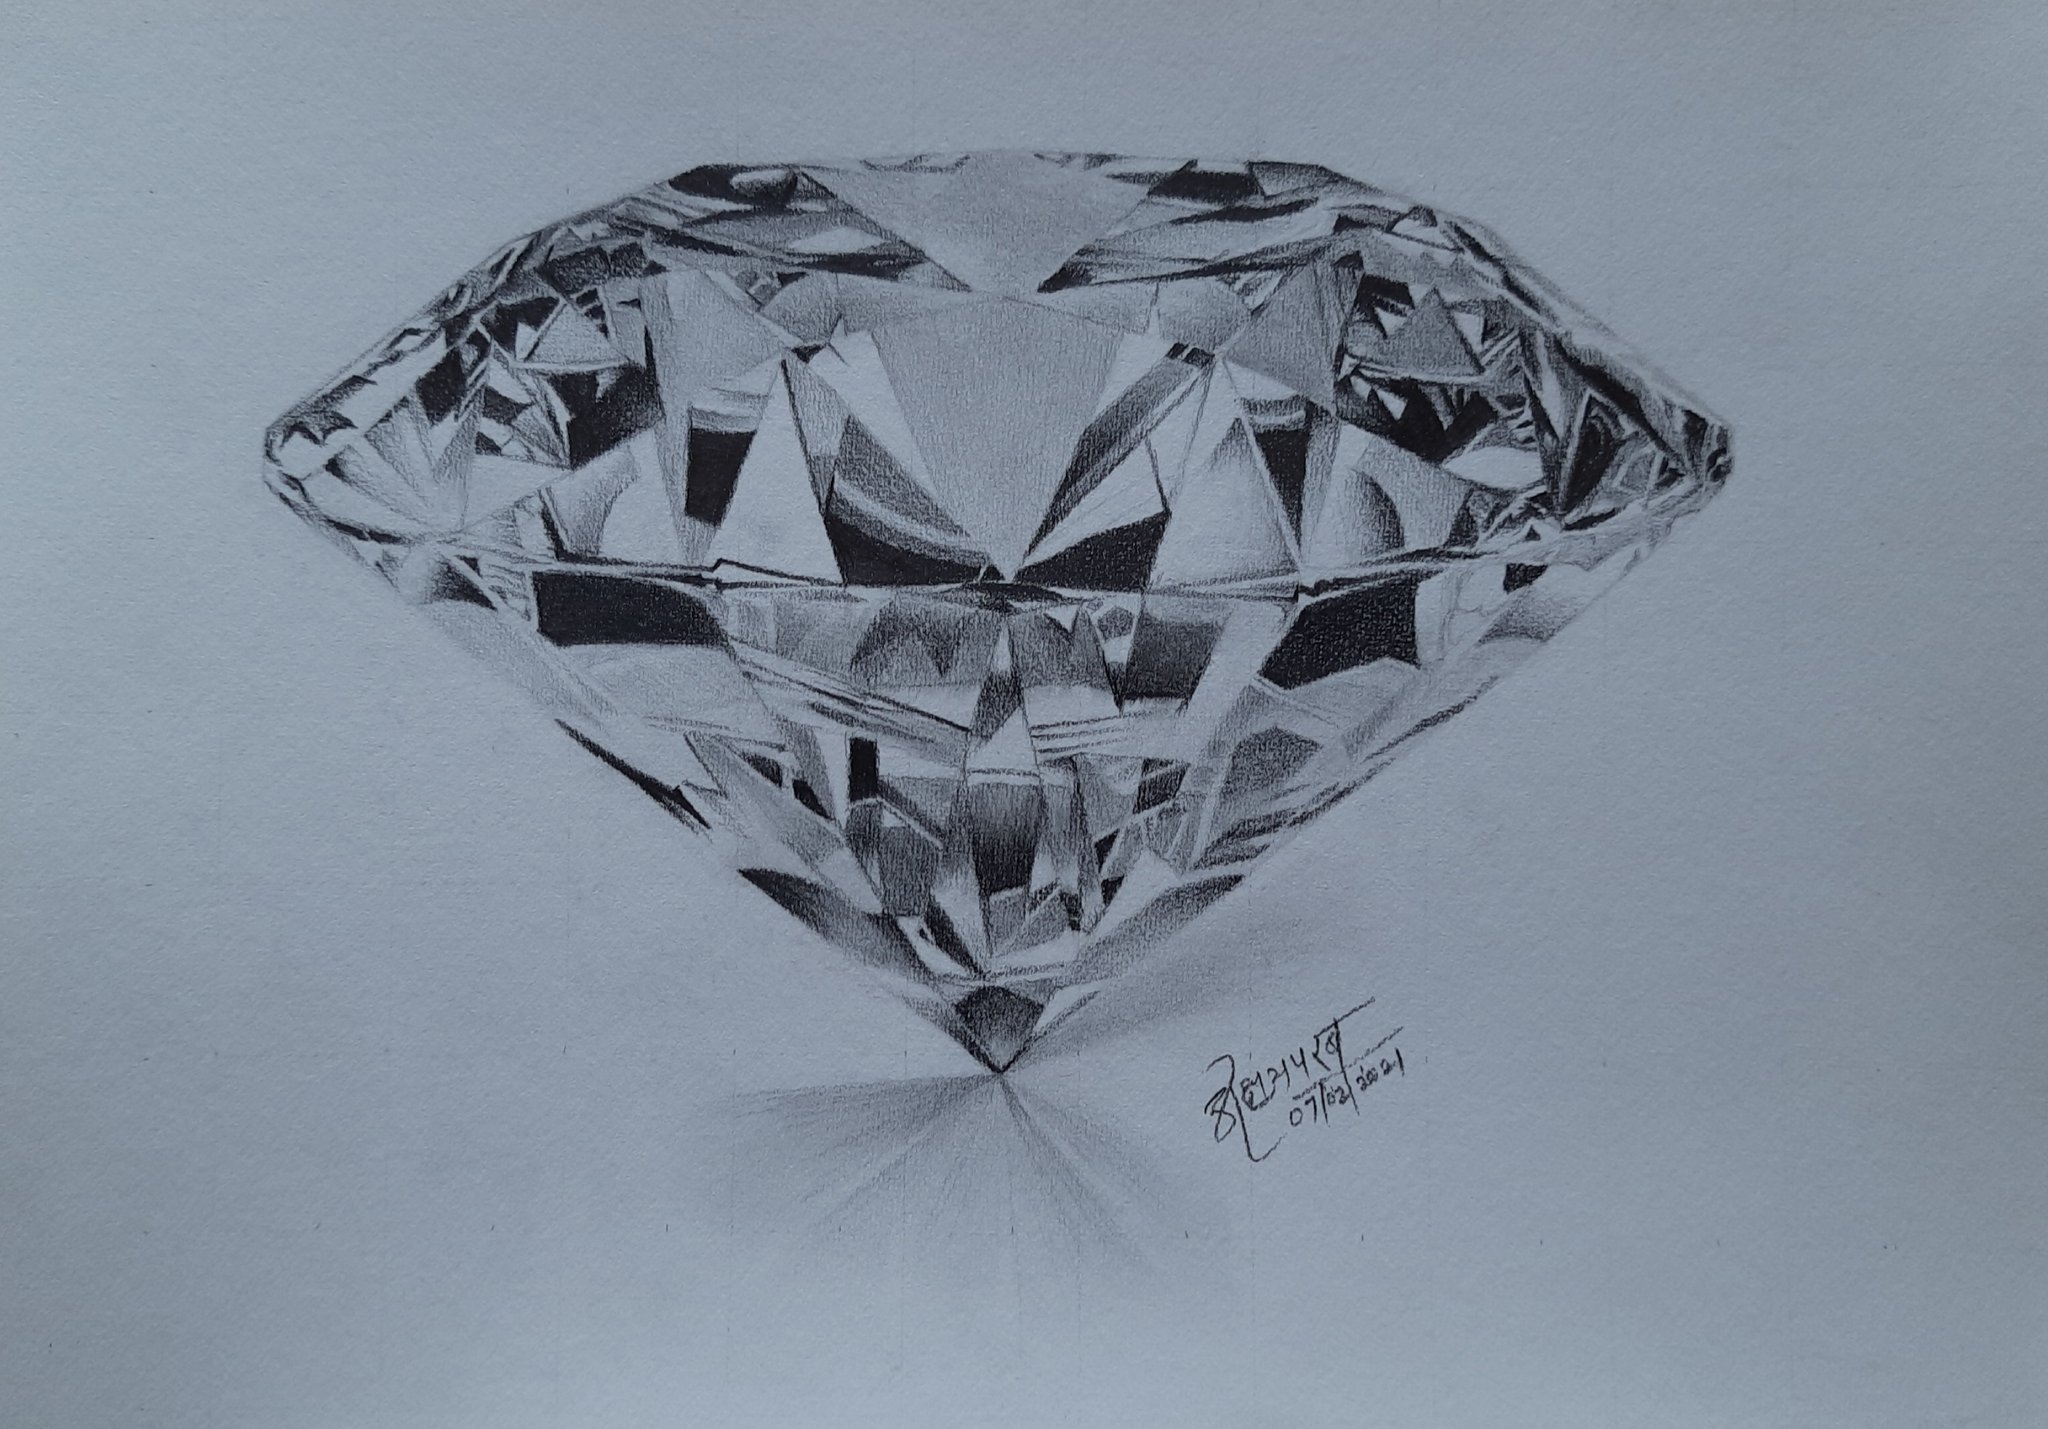 How to Draw a Diamond - Easy Steps to the Complex Shape